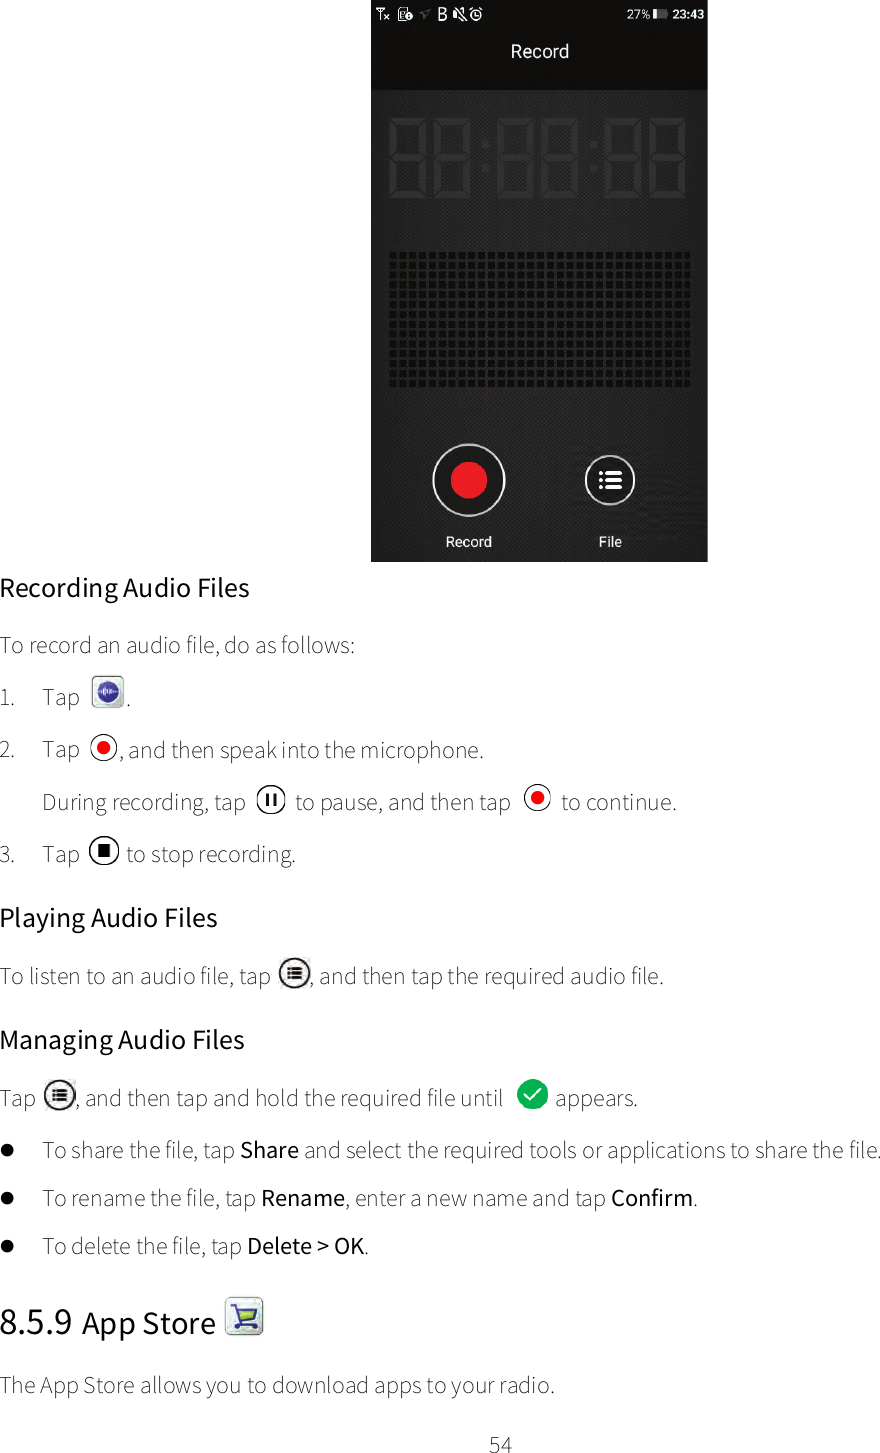    54   Recording Audio Files To record an audio file, do as follows: 1. Tap  . 2. Tap  , and then speak into the microphone. During recording, tap   to pause, and then tap   to continue. 3. Tap  to stop recording. Playing Audio Files To listen to an audio file, tap  , and then tap the required audio file. Managing Audio Files Tap  , and then tap and hold the required file until   appears.  To share the file, tap Share and select the required tools or applications to share the file.  To rename the file, tap Rename, enter a new name and tap Confirm.  To delete the file, tap Delete &gt; OK. 8.5.9 App Store   The App Store allows you to download apps to your radio. 